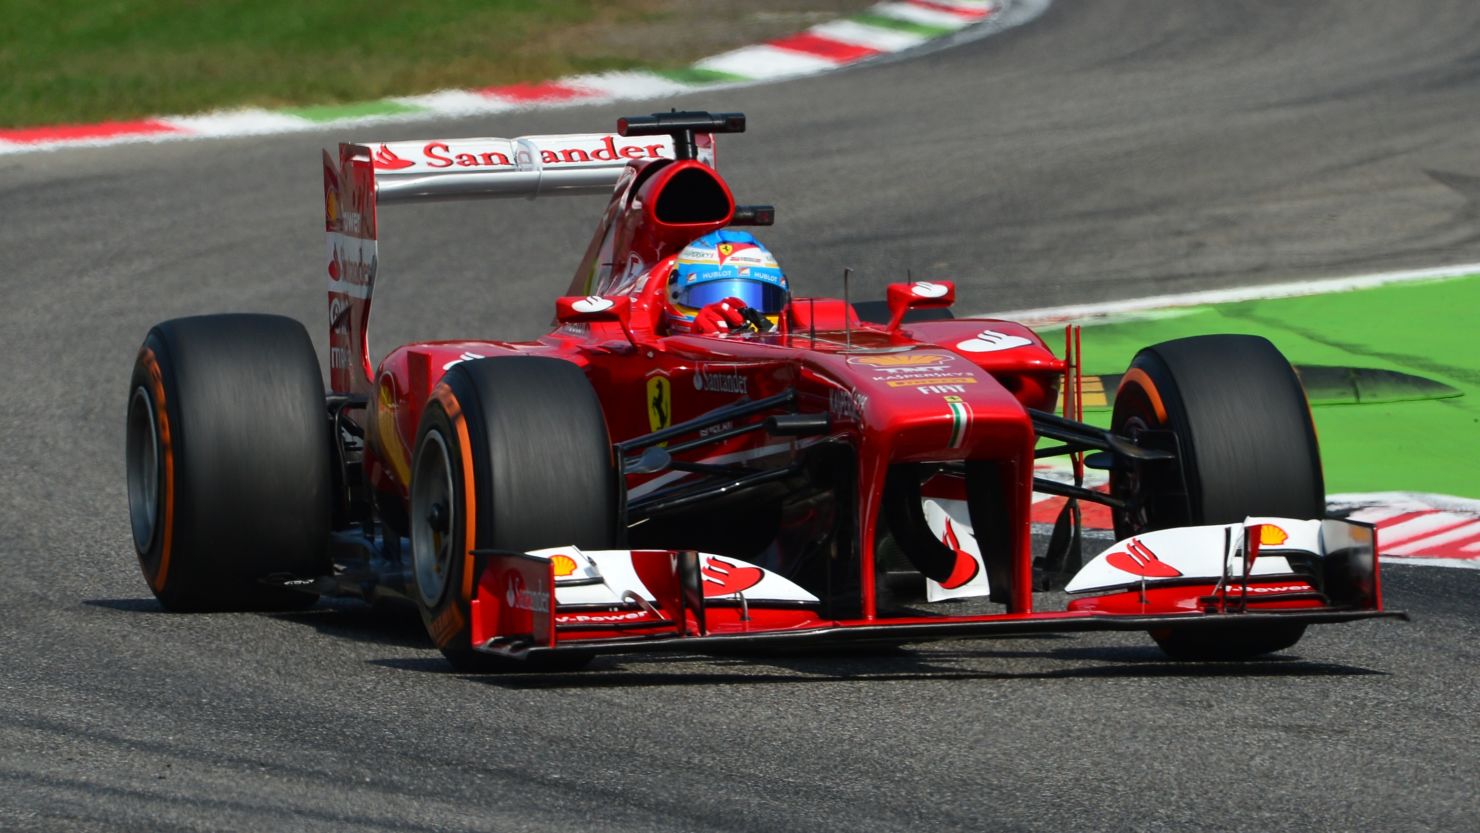 Spanish driver Fernando Alonso is hoping to give Ferrari victory at the team's home Italian Grand Prix. 